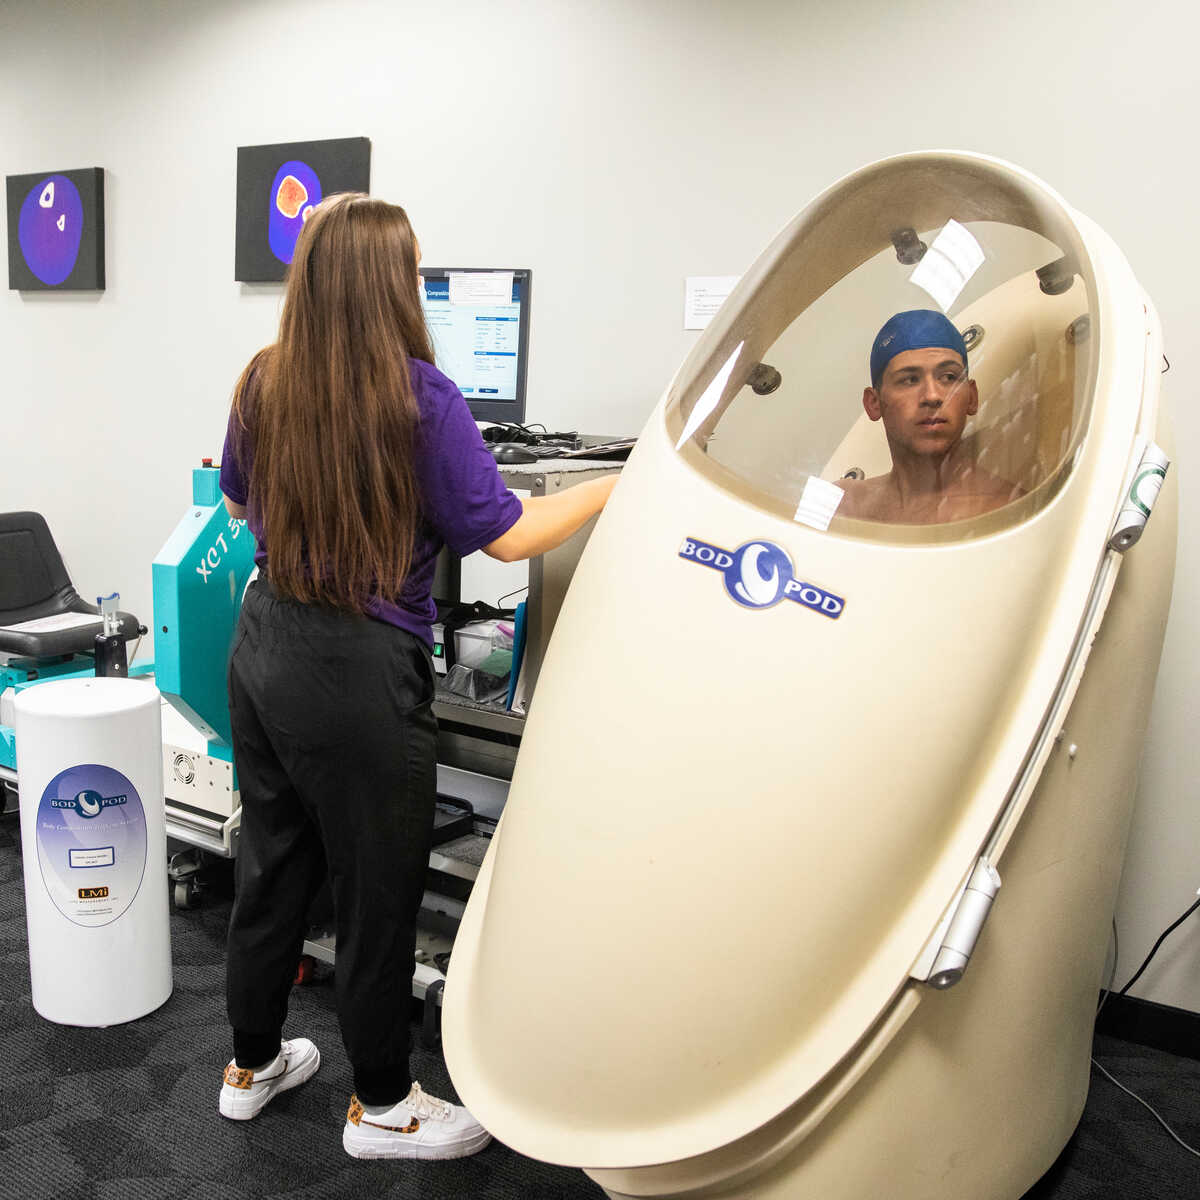 A female student observes a male student in a Bod Pod